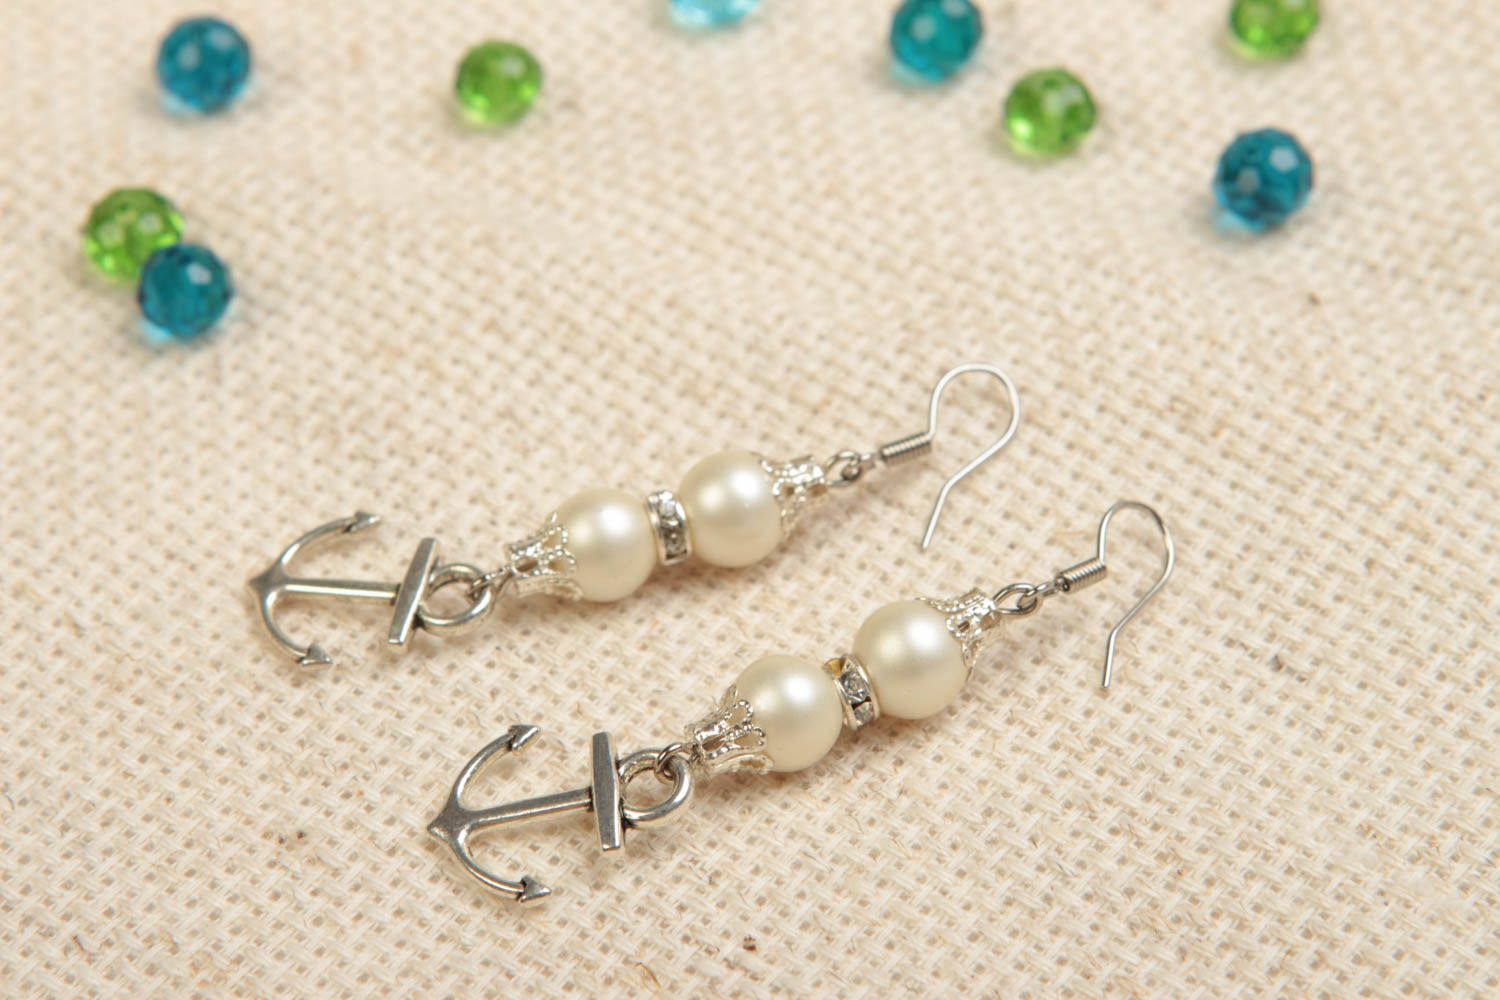 Handcrafted metal earrings with pearl beads designer jewelry gifts for her photo 1